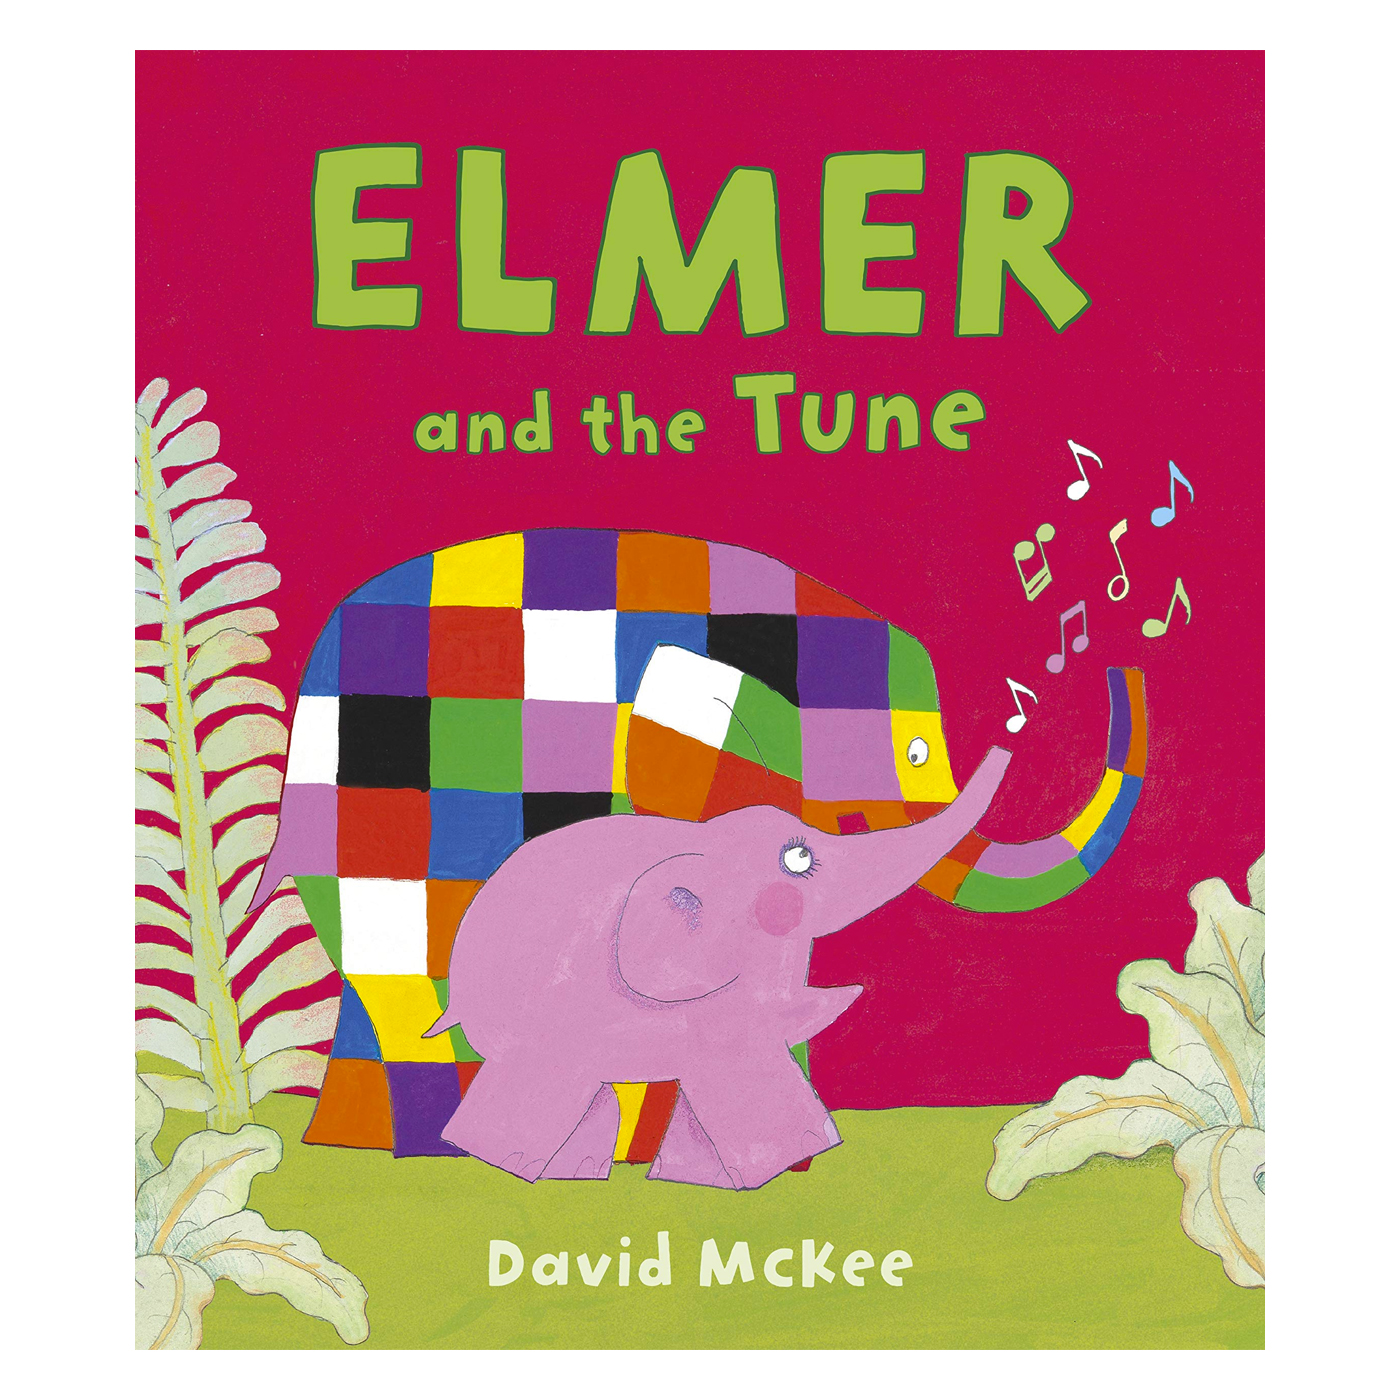  Elmer and the Tune